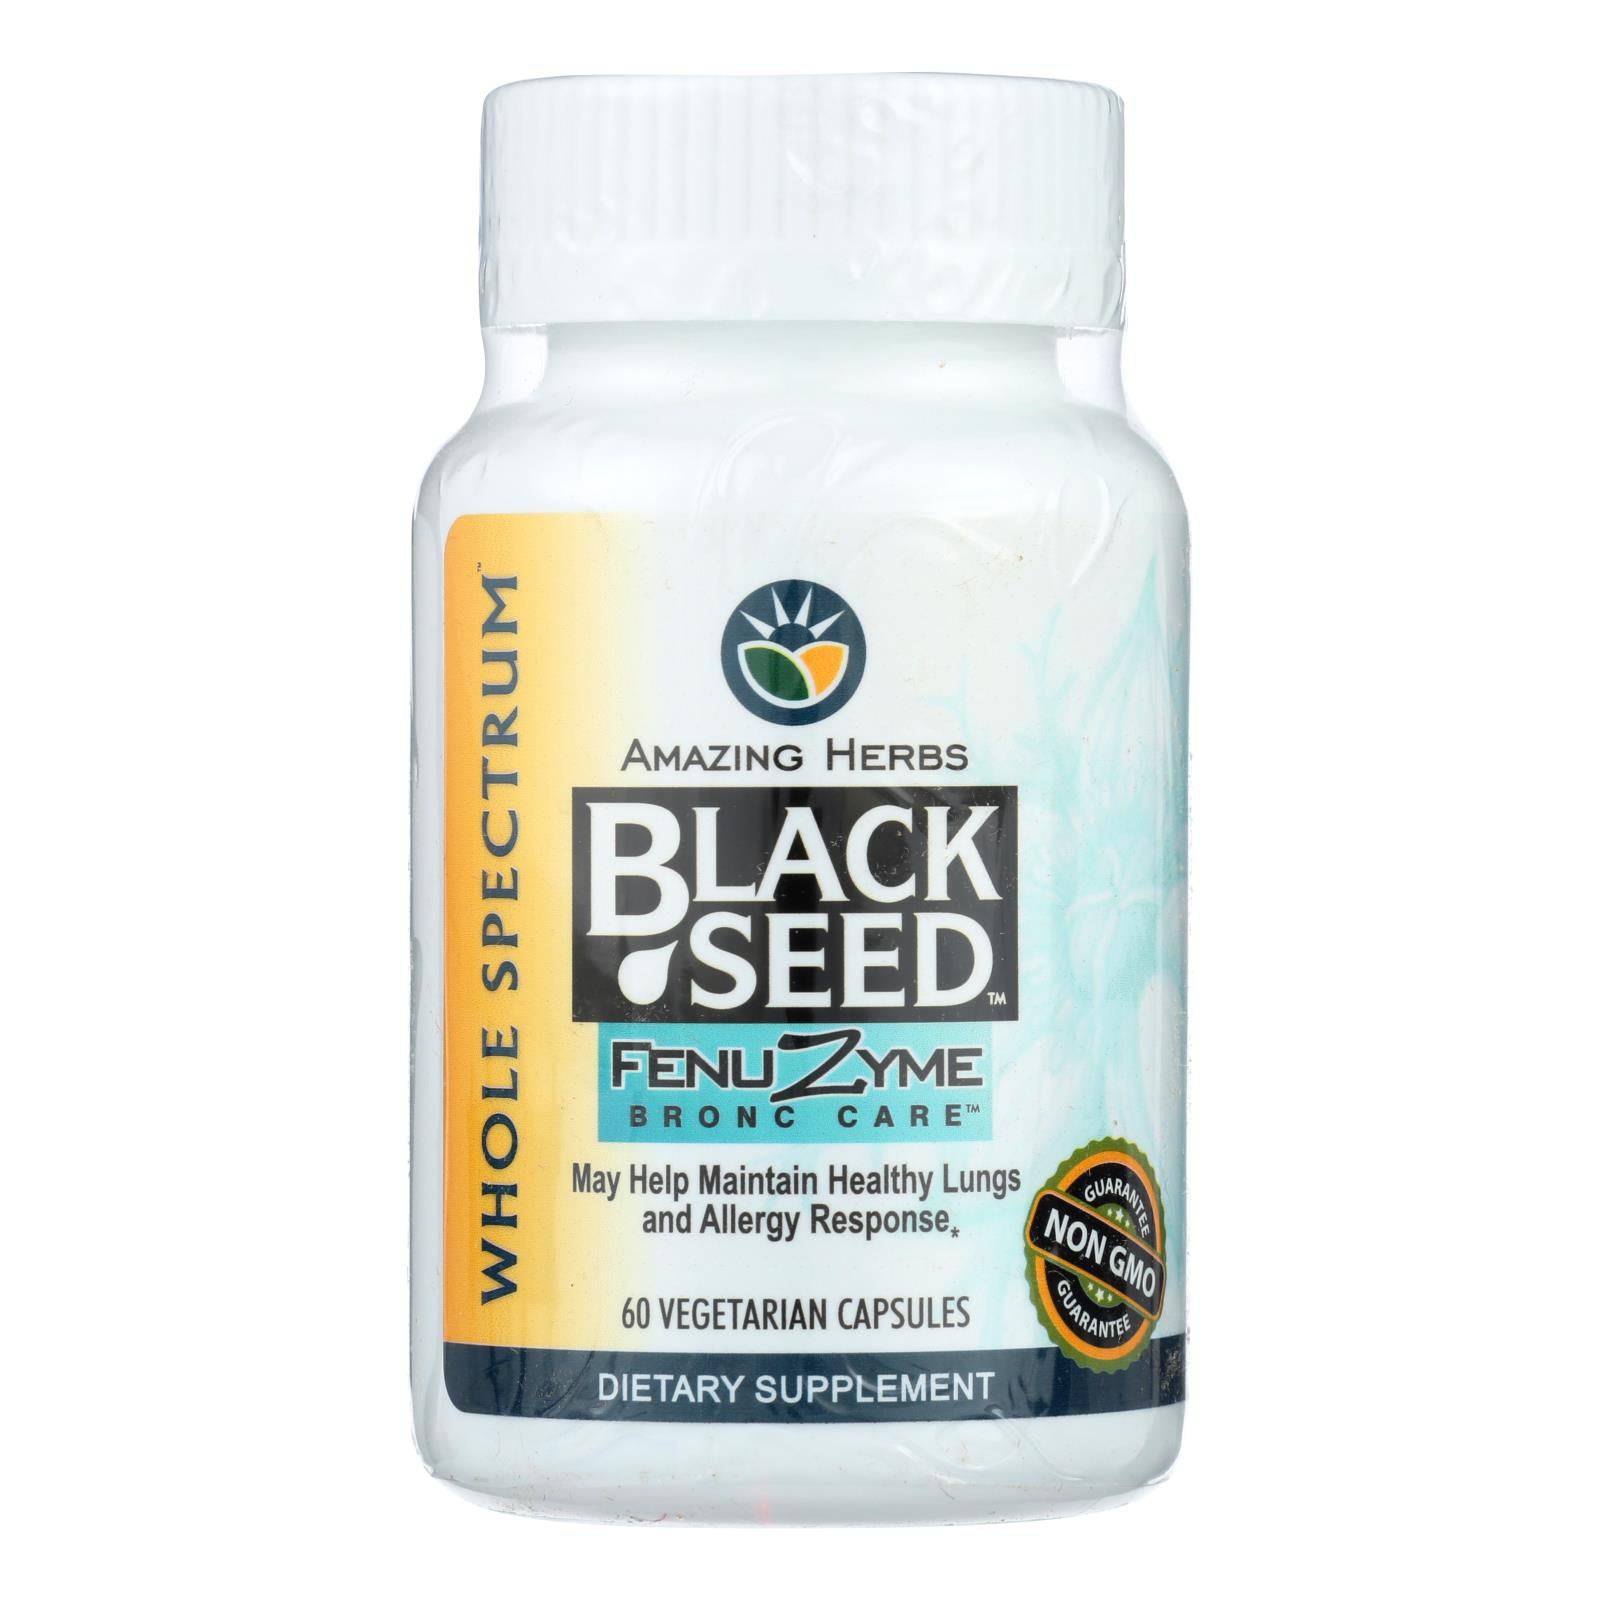 Amazing Herbs - Black Seed Fenuzyme Bronc Care - 60 Capsules | OnlyNaturals.us